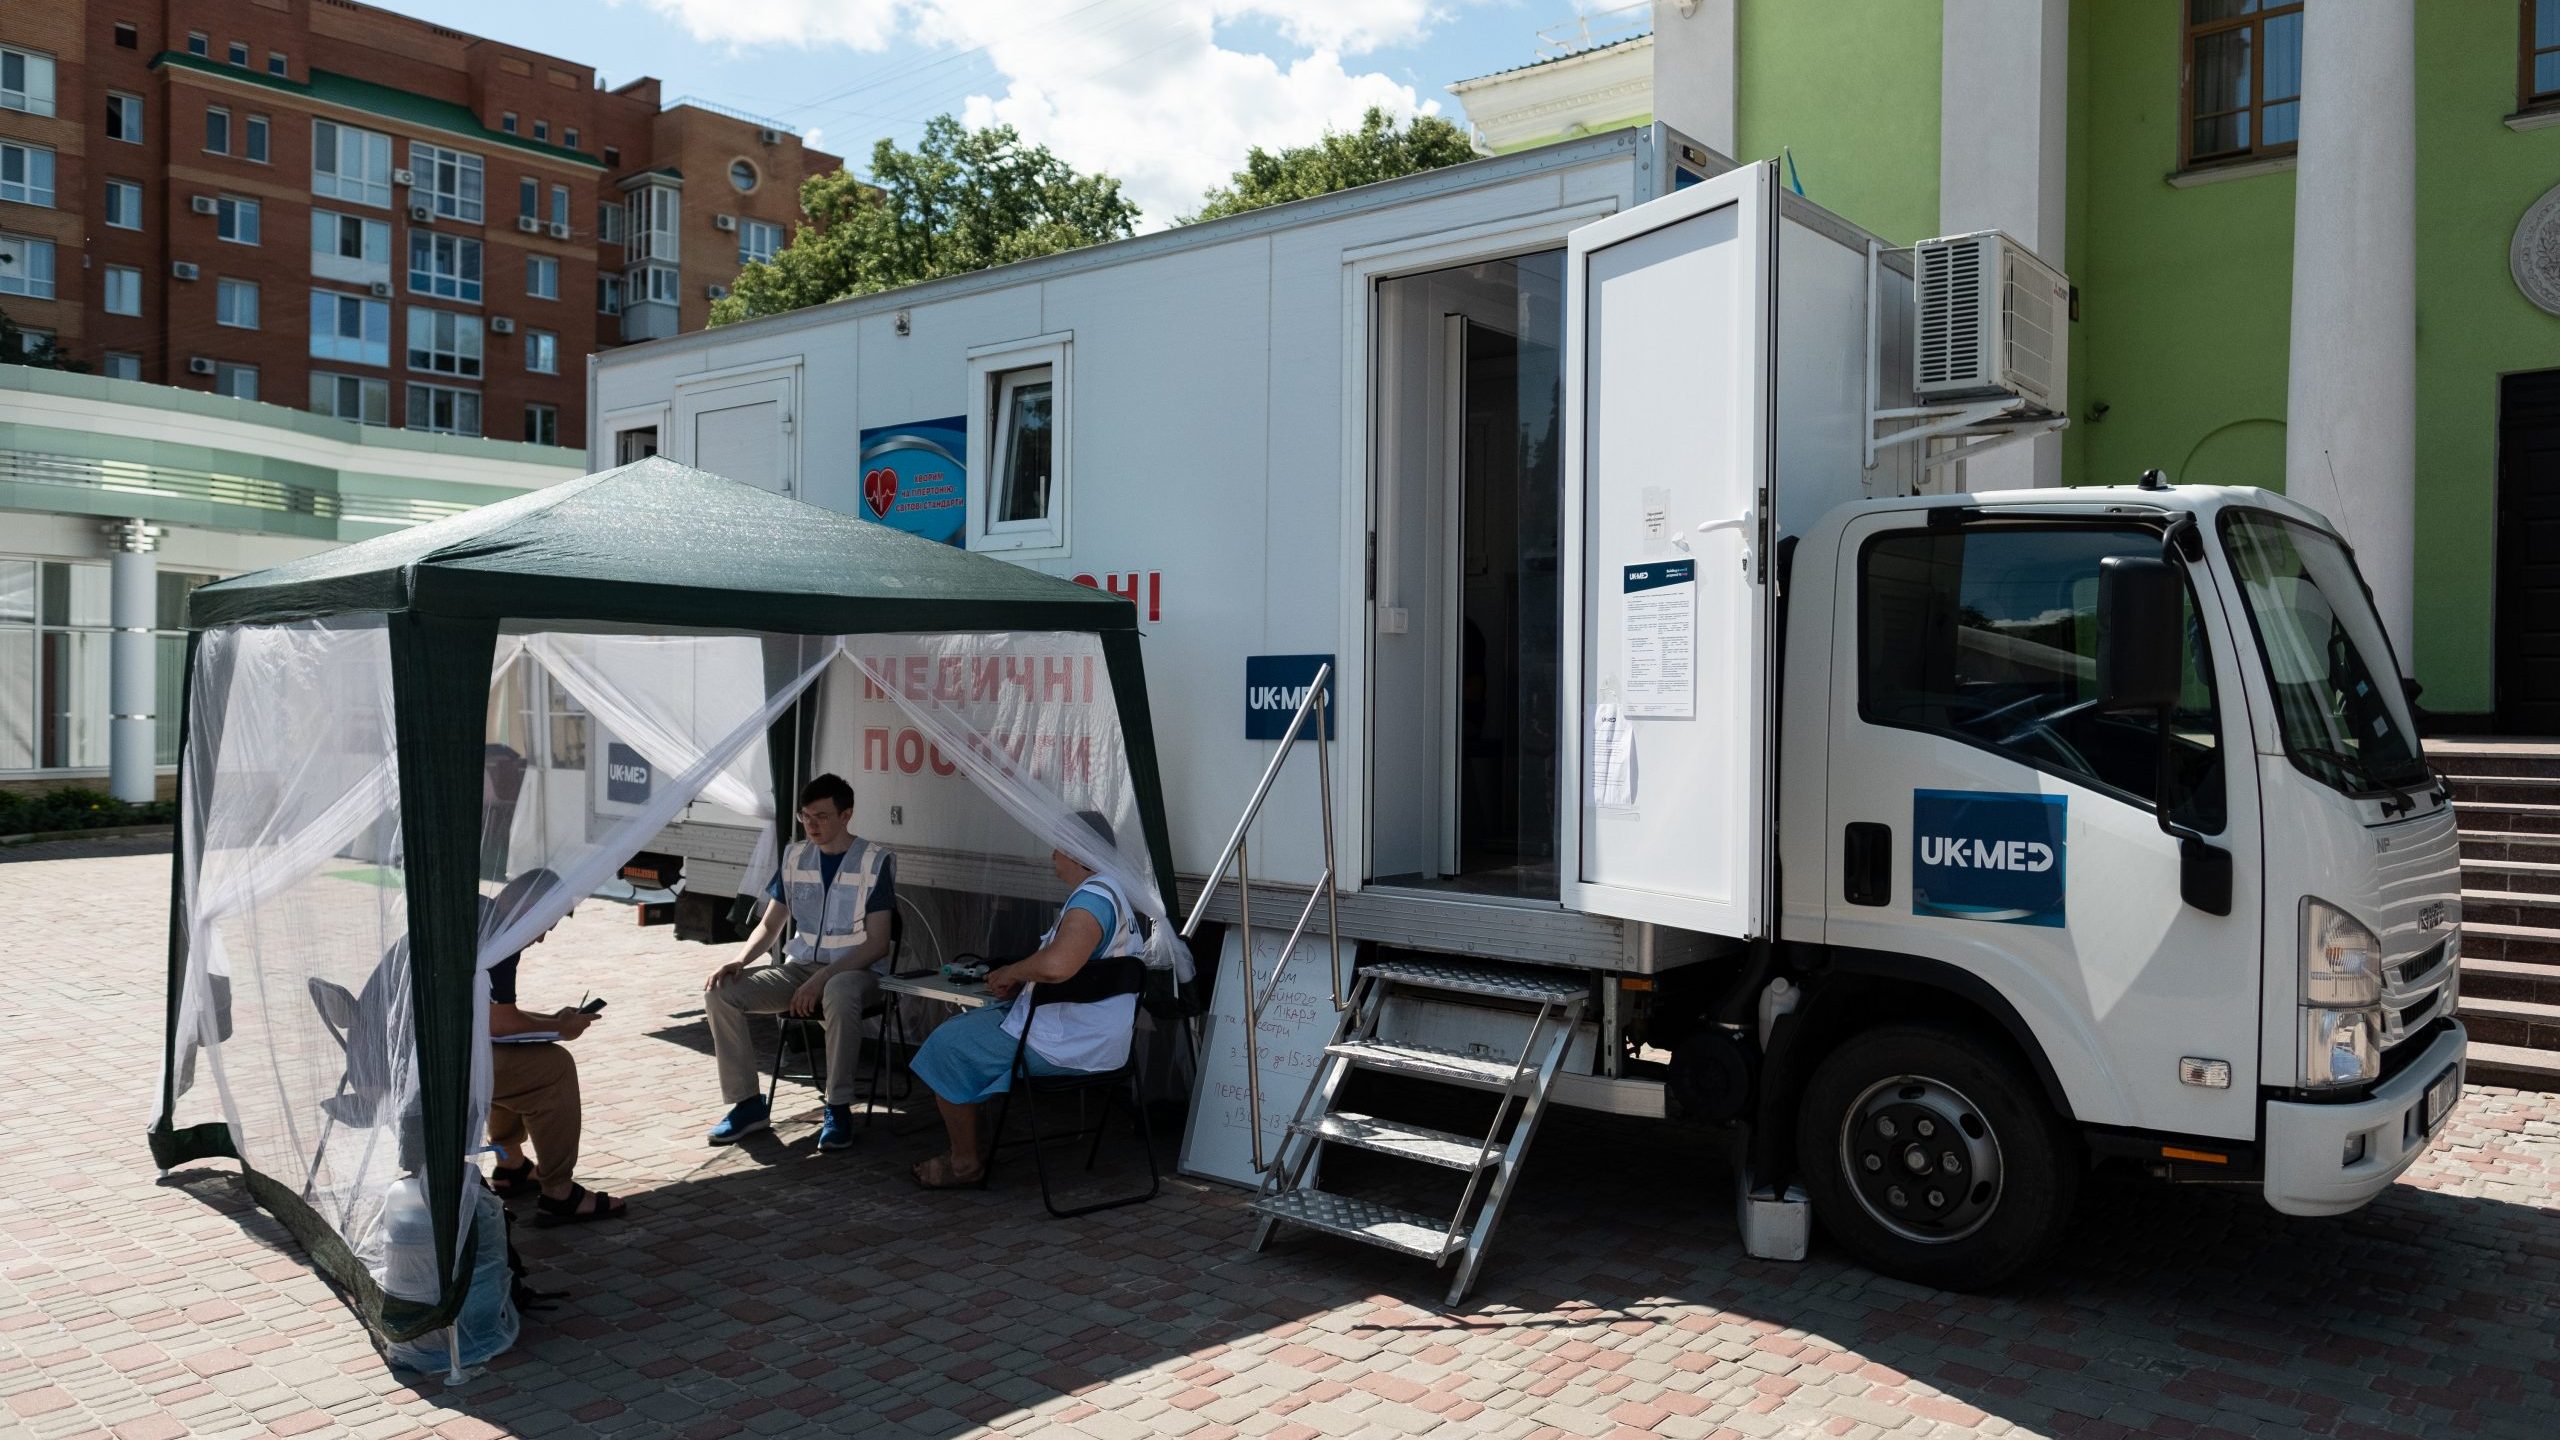 A mobile health clinic in Poltava. Credit: Photo credit: Jonathan Moore, July 2022.